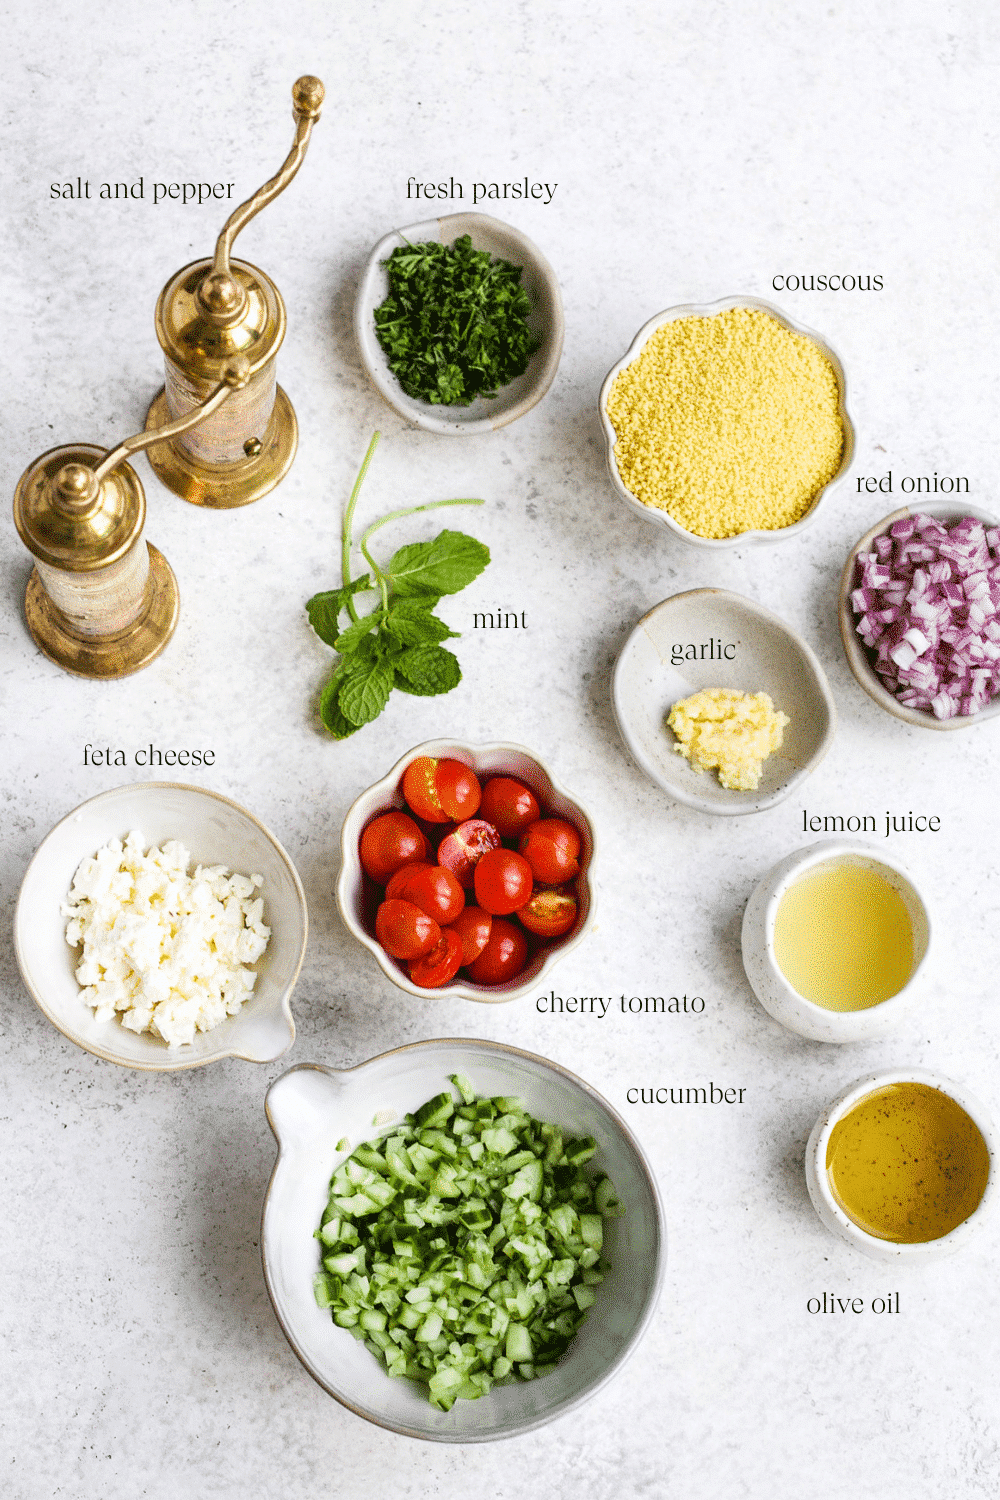 overhead view of all the ingredients for the couscous salad.